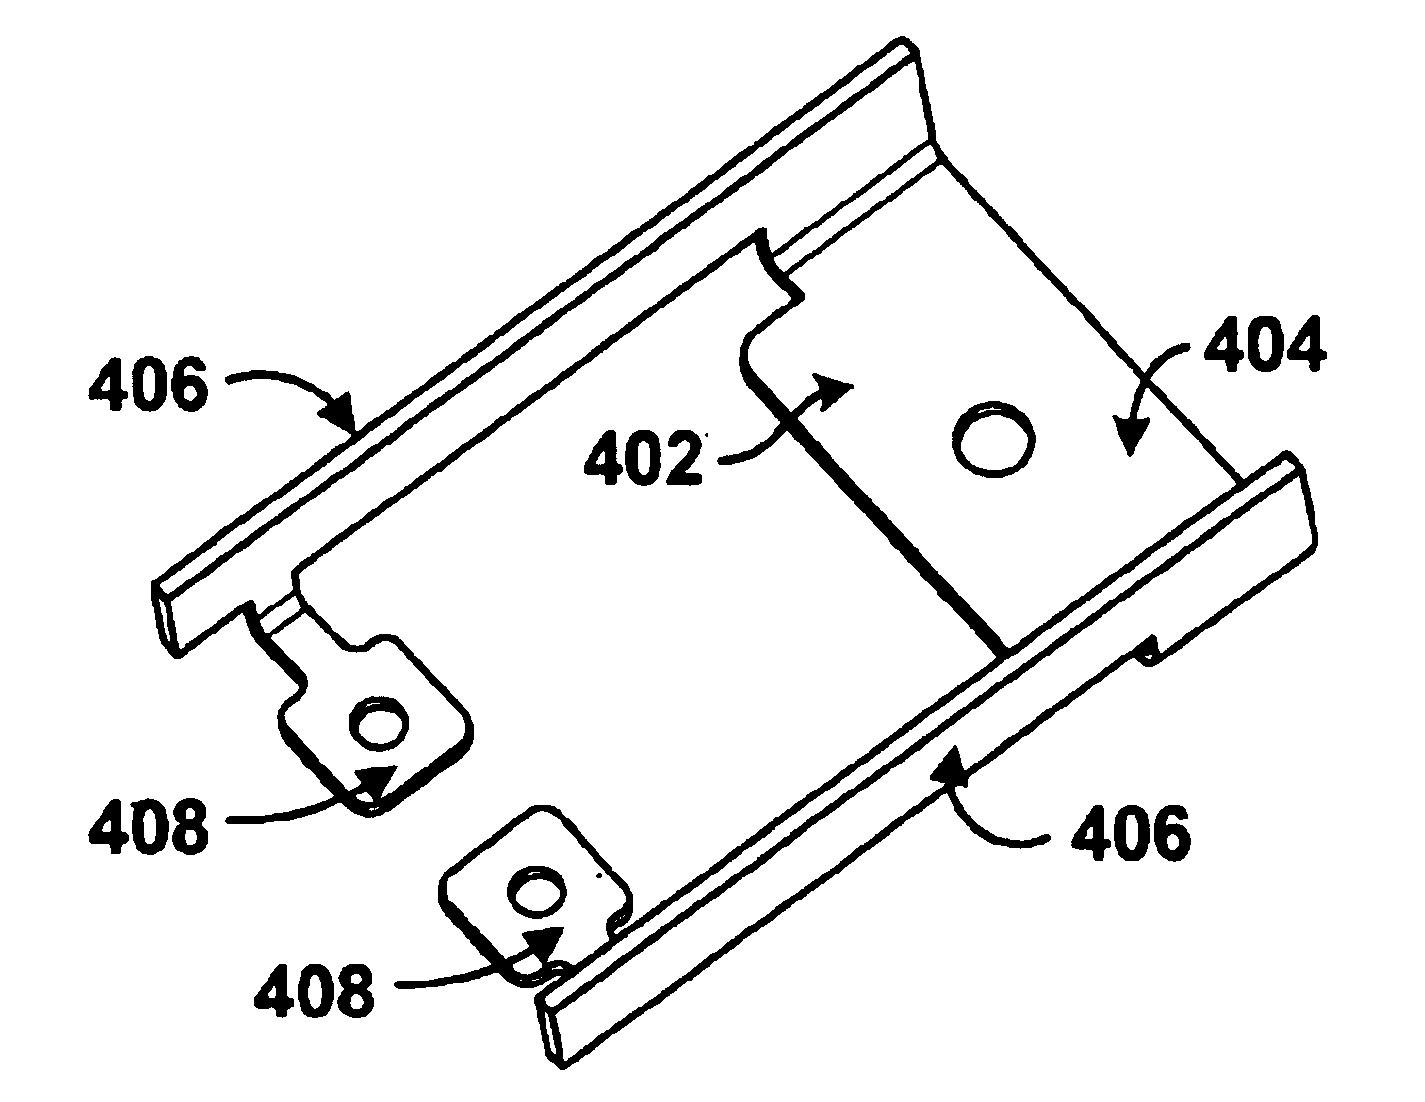 Collocated metal frame PZT micro-actuator with a lower stiffness suspension design